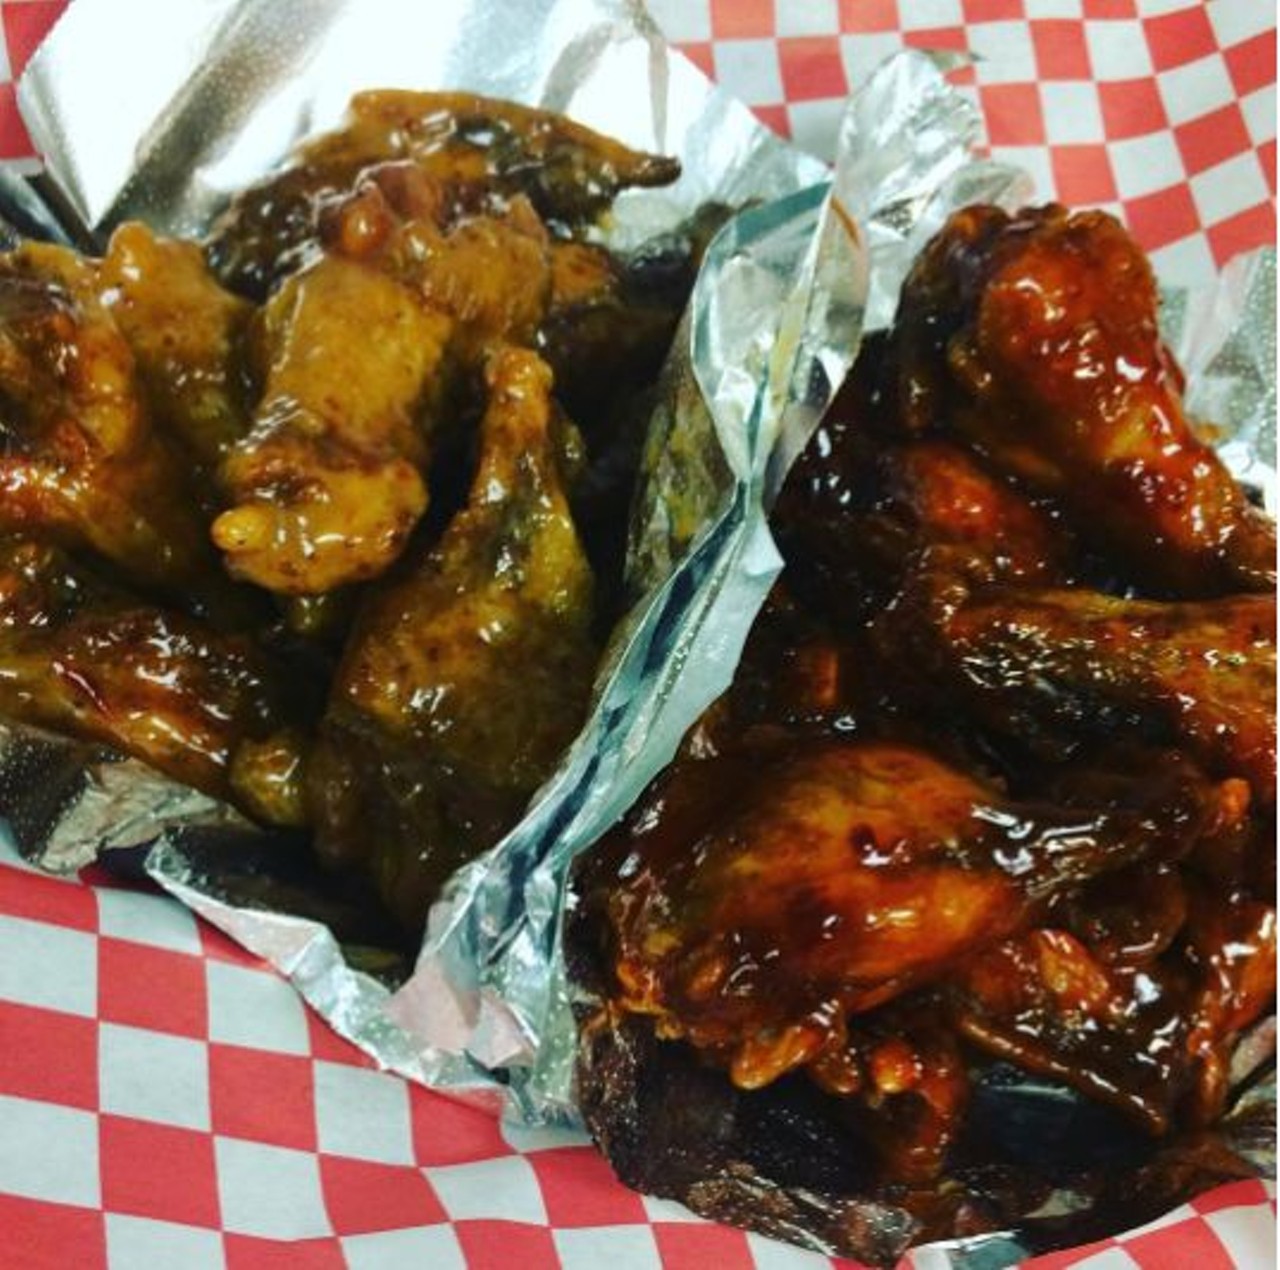 WingIT
(210) 900-3097,
orderwingit.com
With a multitude of different flavors to choose from, there's no going wrong at WingIT.
Photo via 
wingit210
